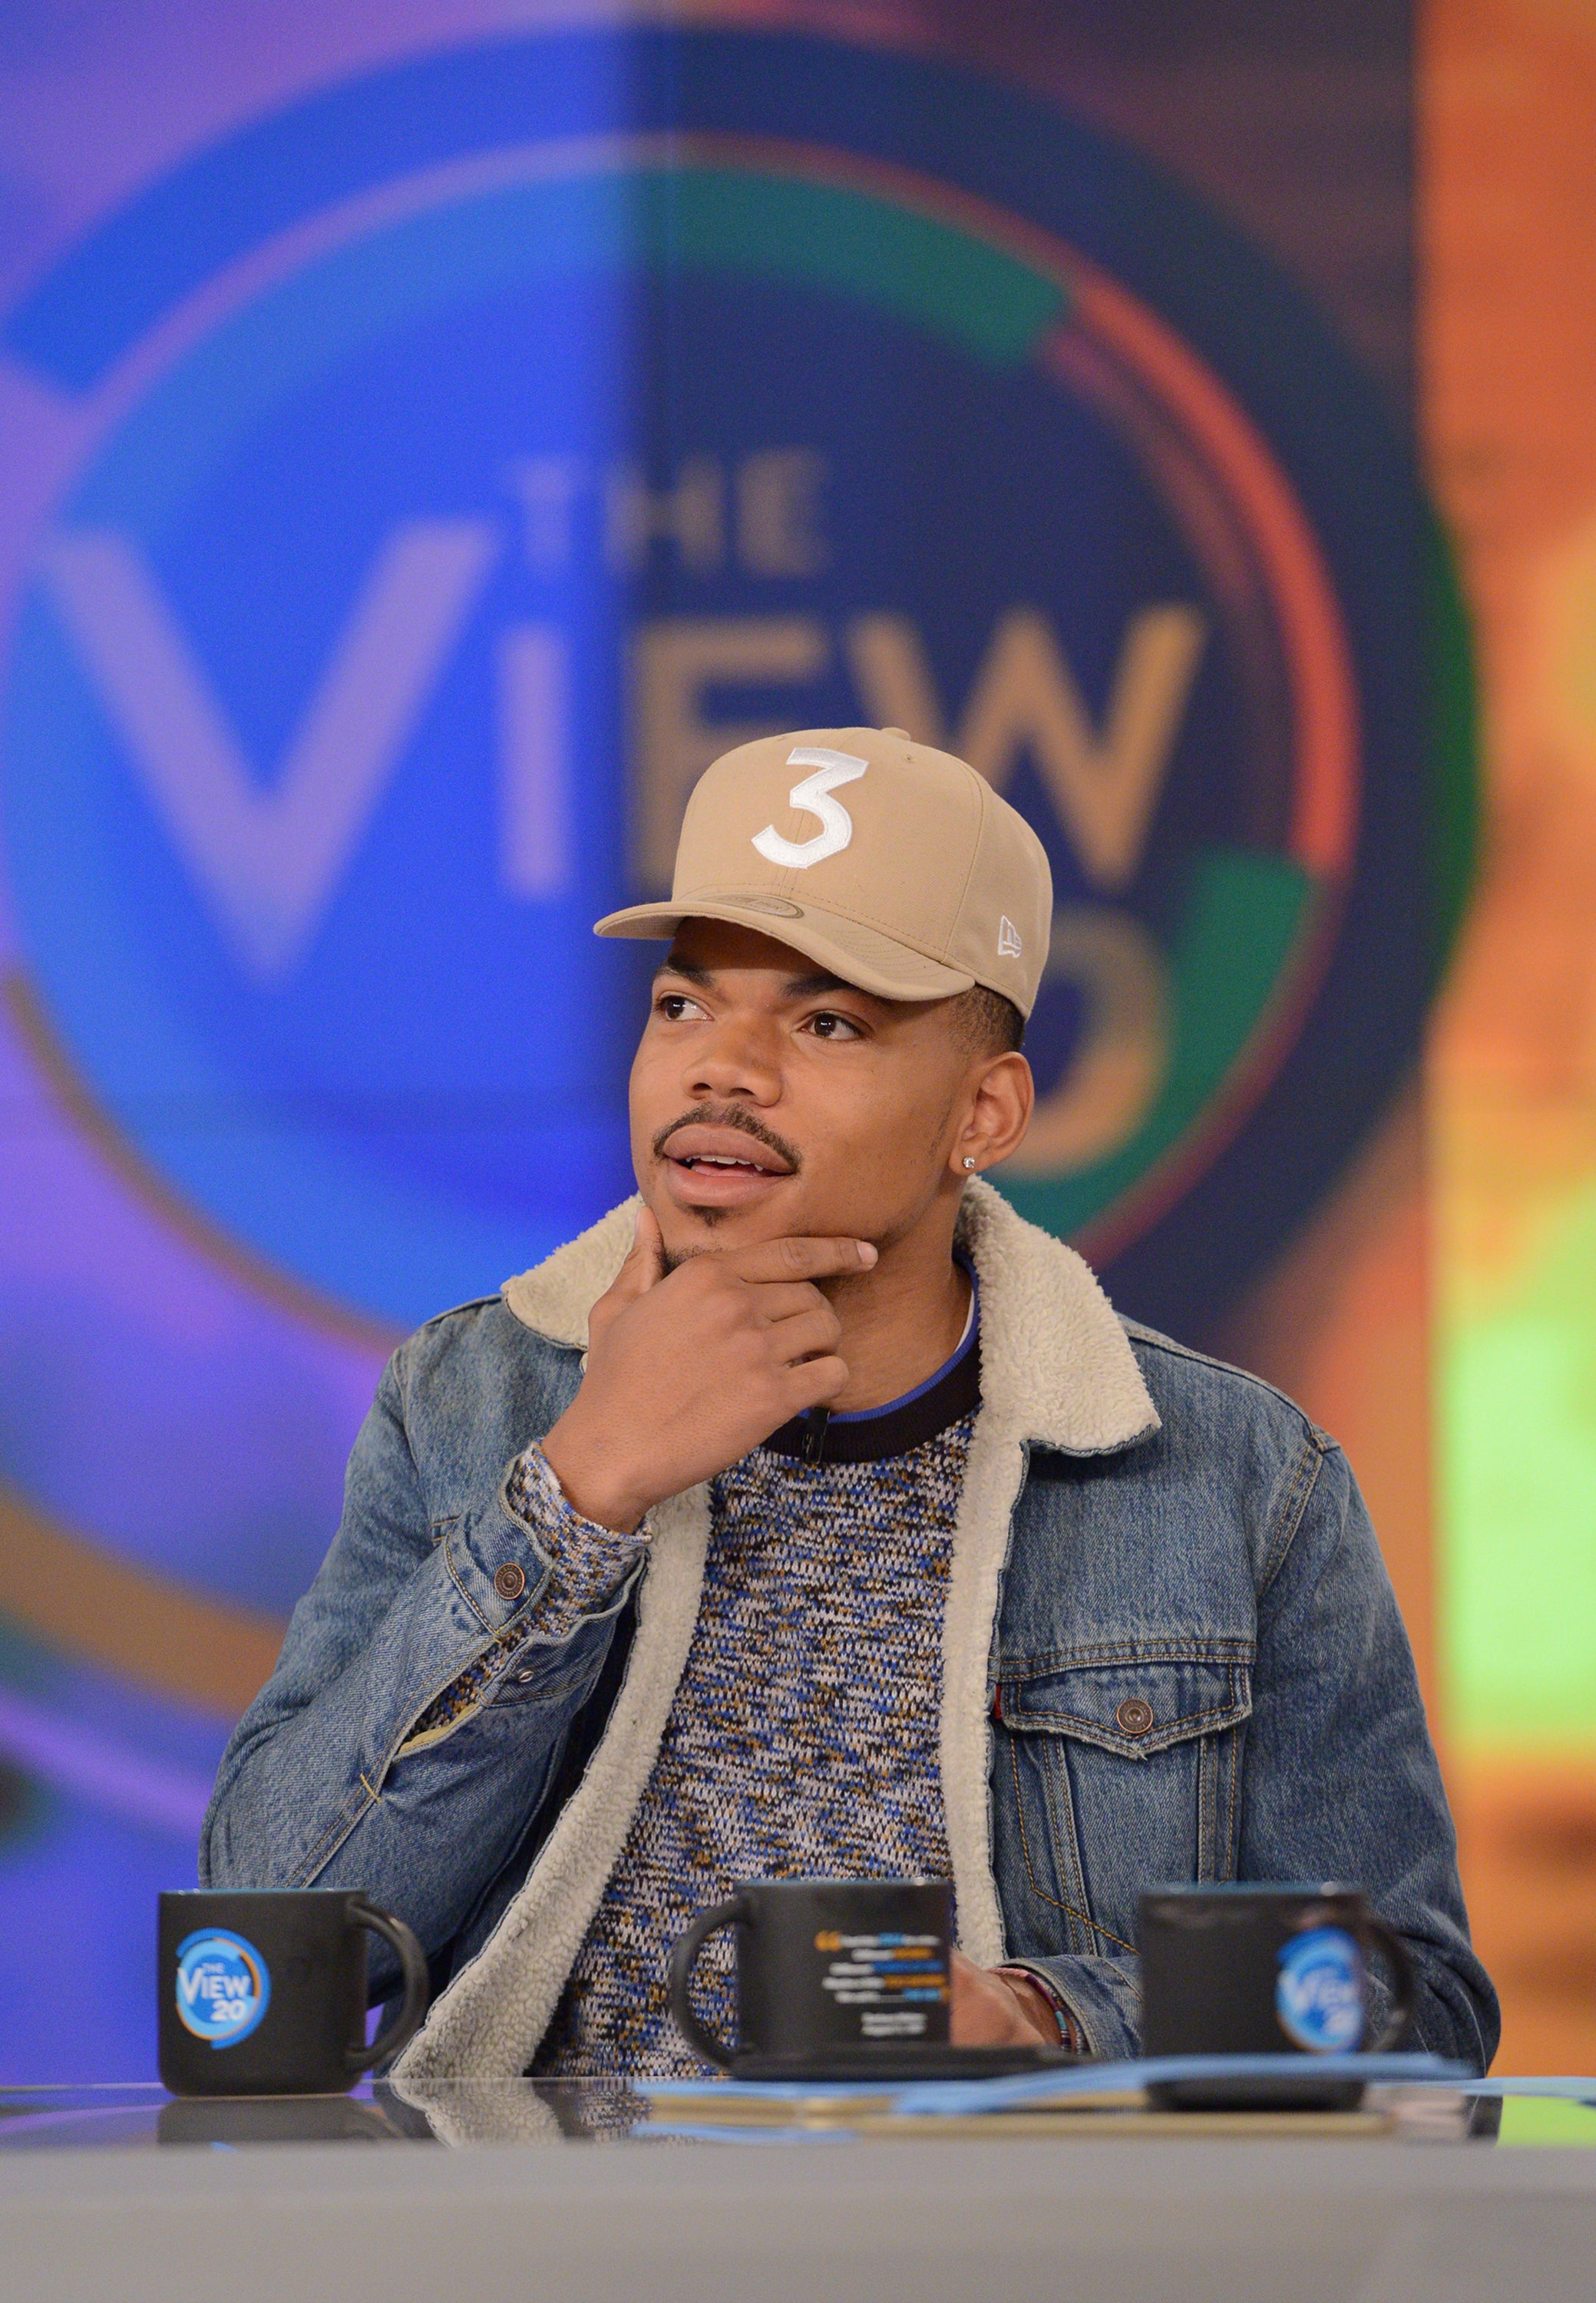 Chance The Rapper Shares How The Black Women In His Family Inspire His Spirit Of Activism On 'The View'
